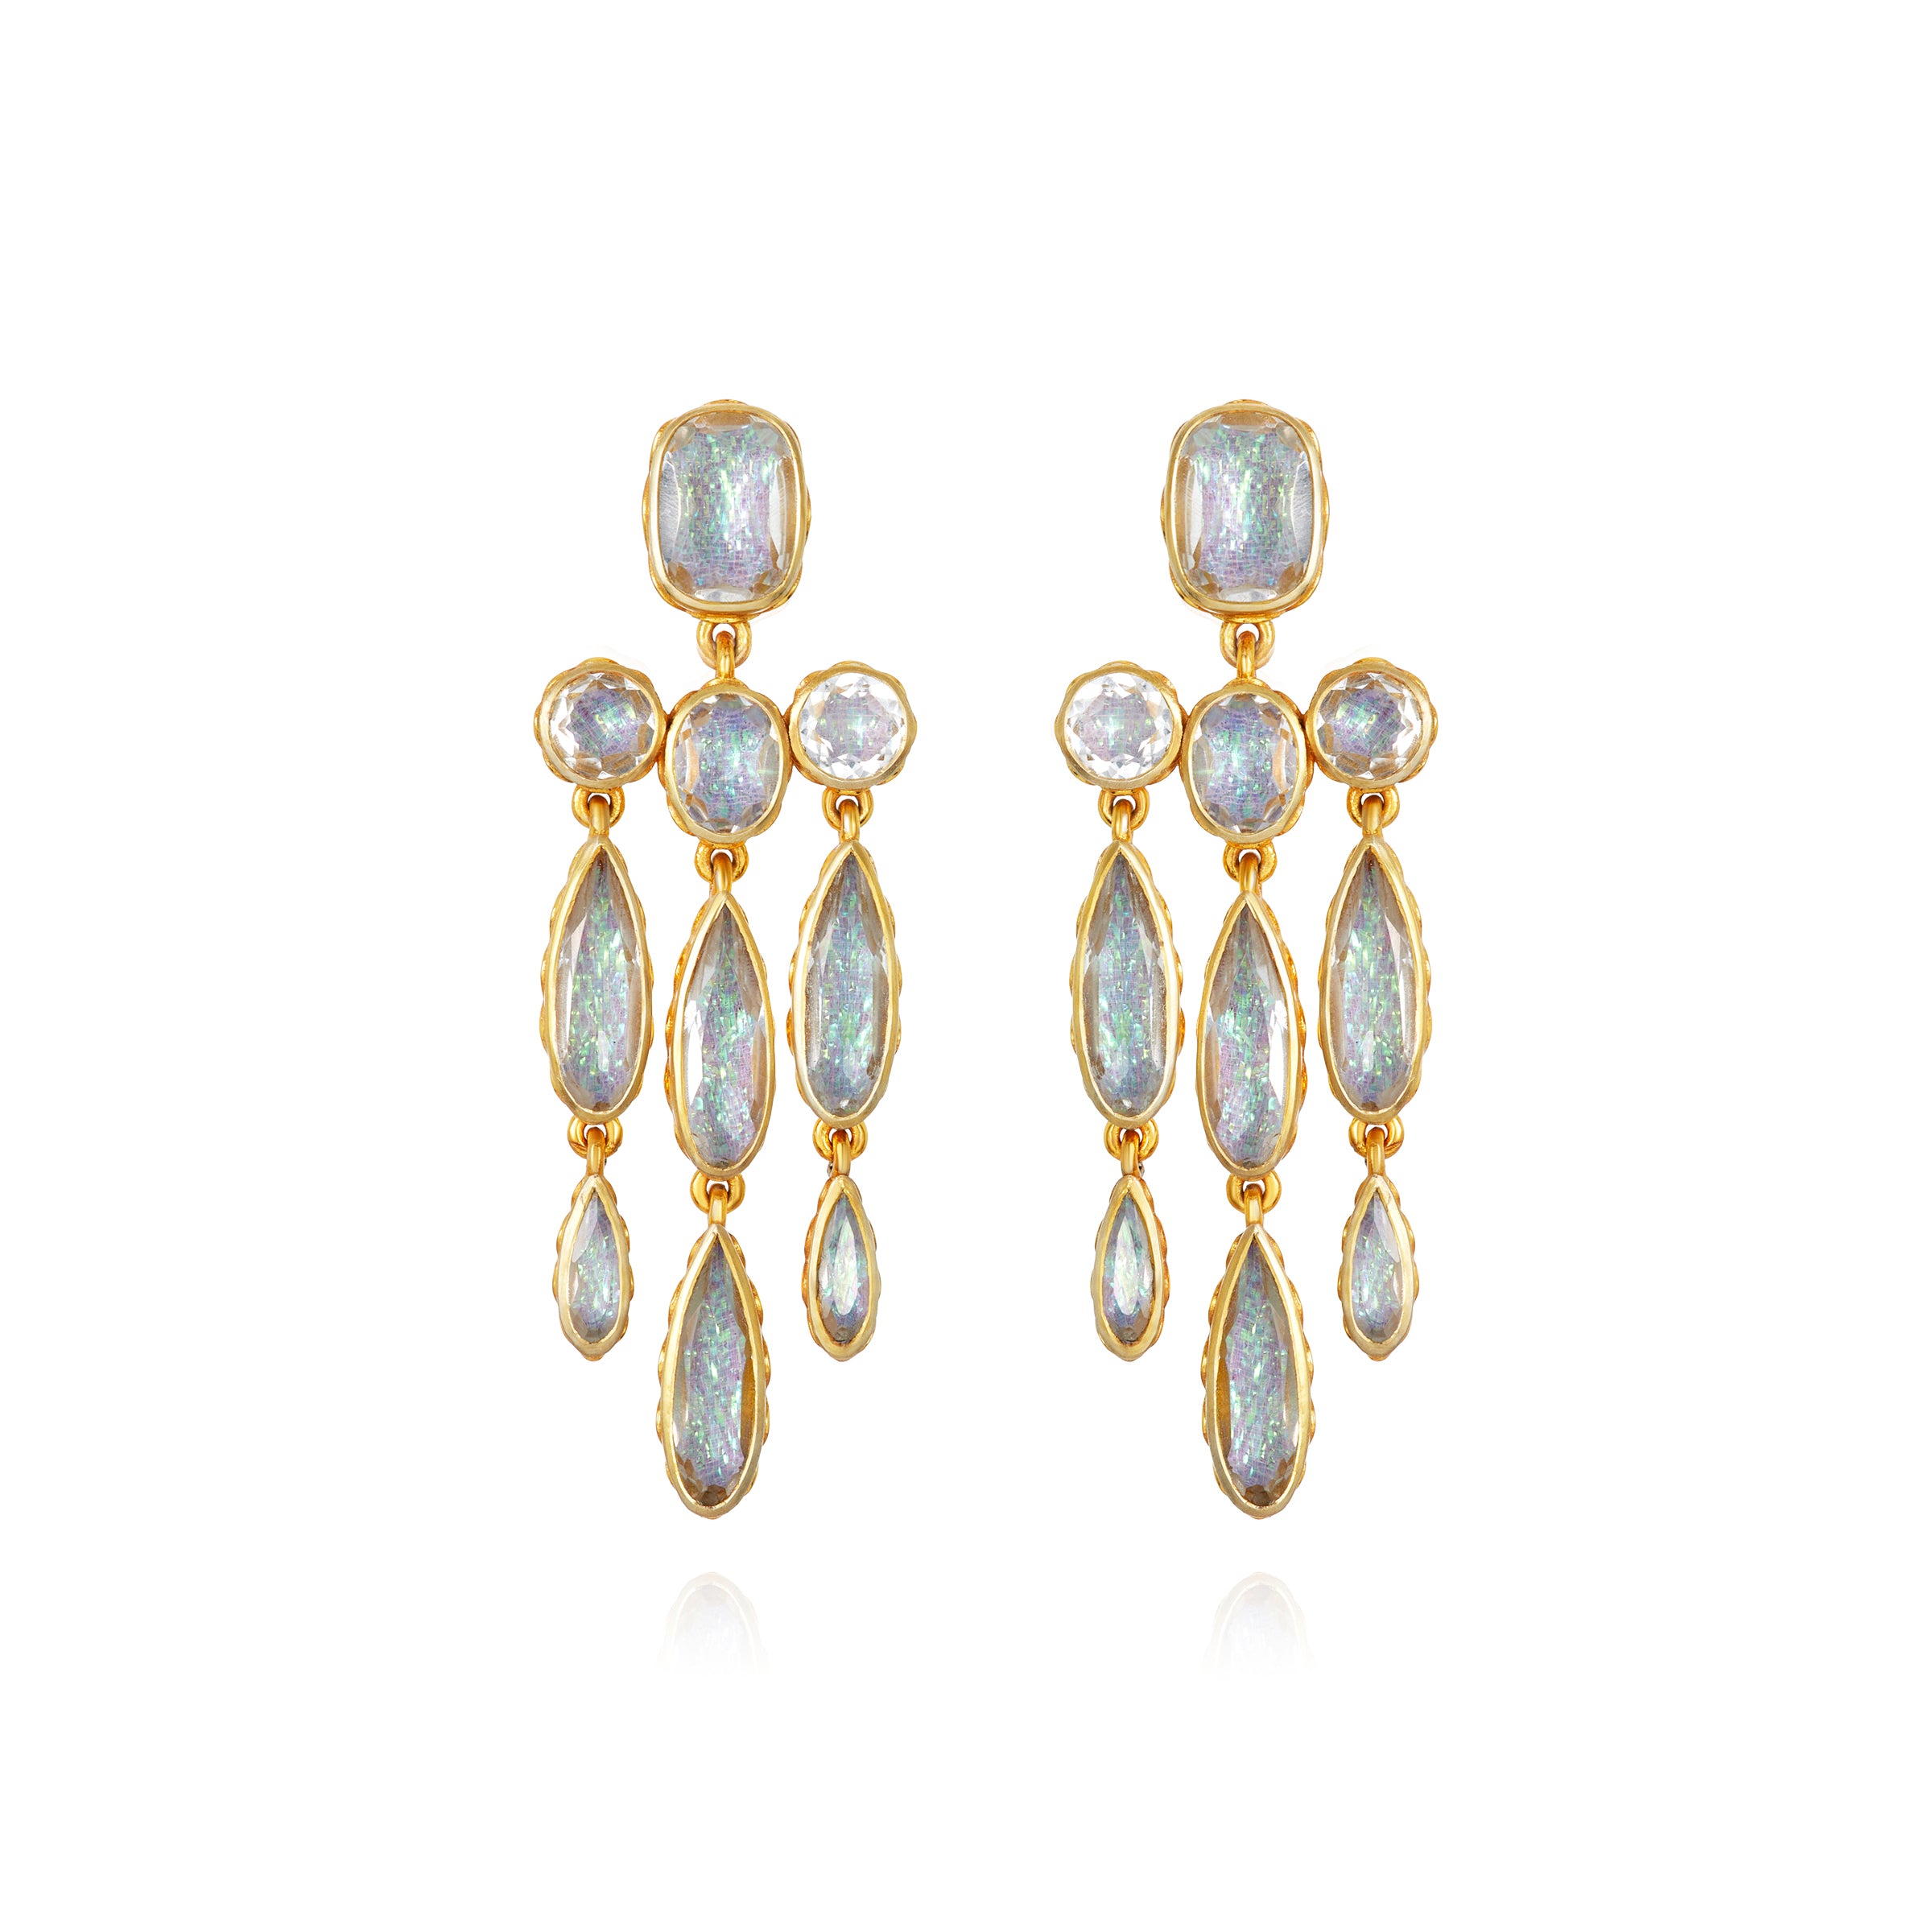 L&H Bride Long Girandole Earrings in Bliss (White Rhodium or Yellow Gold Wash)